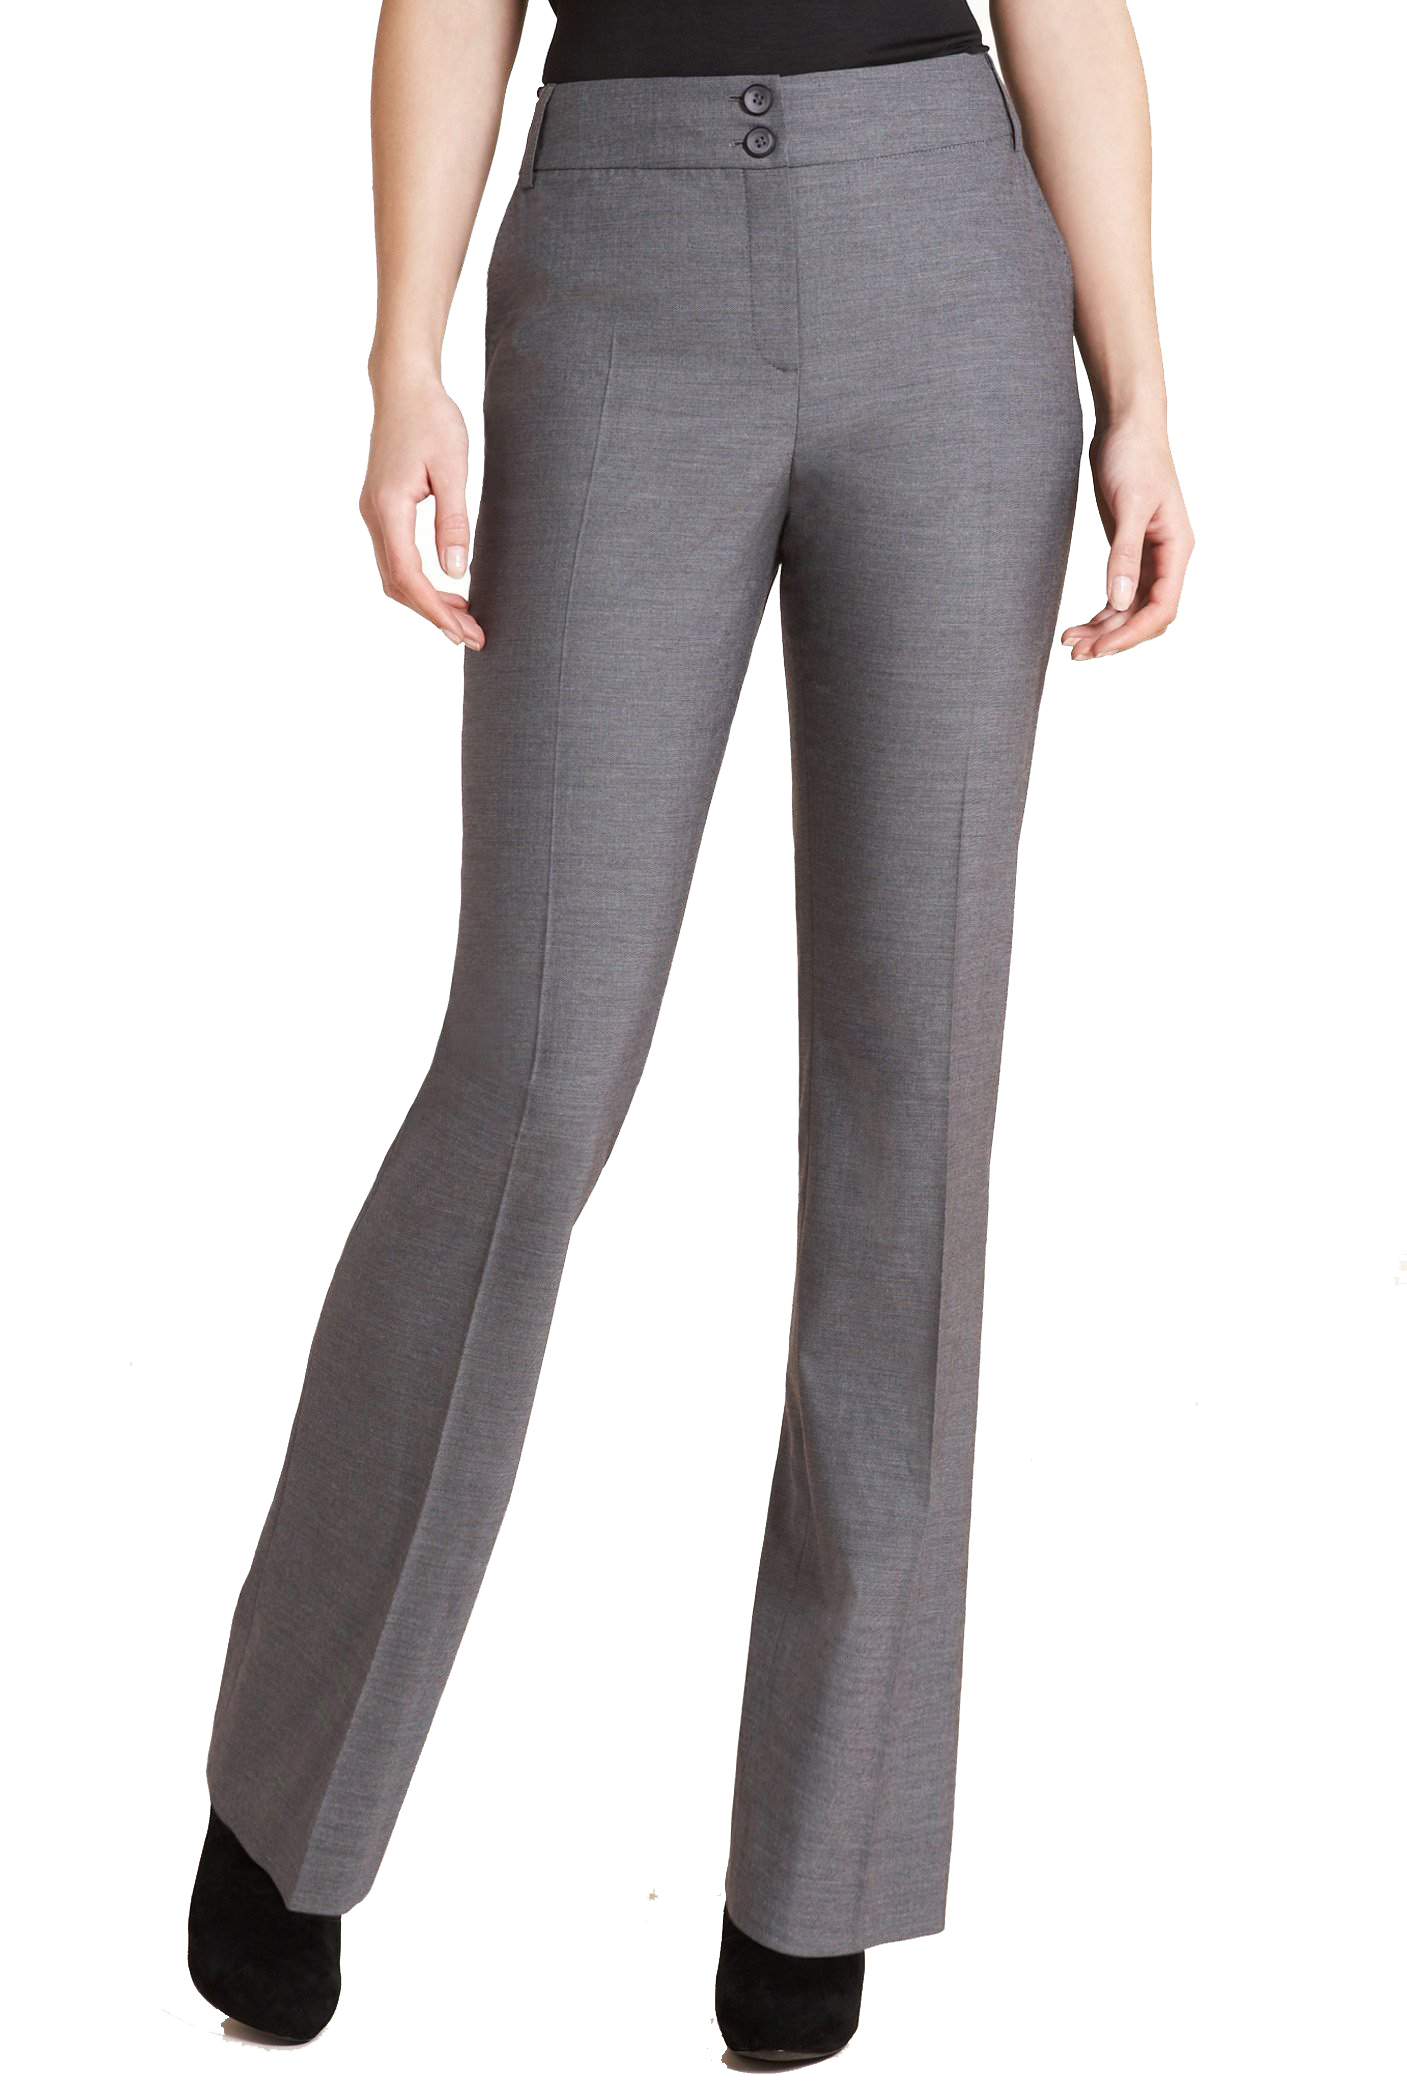 Marks and Spencer - - M&5 GREY Flat Front Wide Leg Trousers - Size 8 to 12